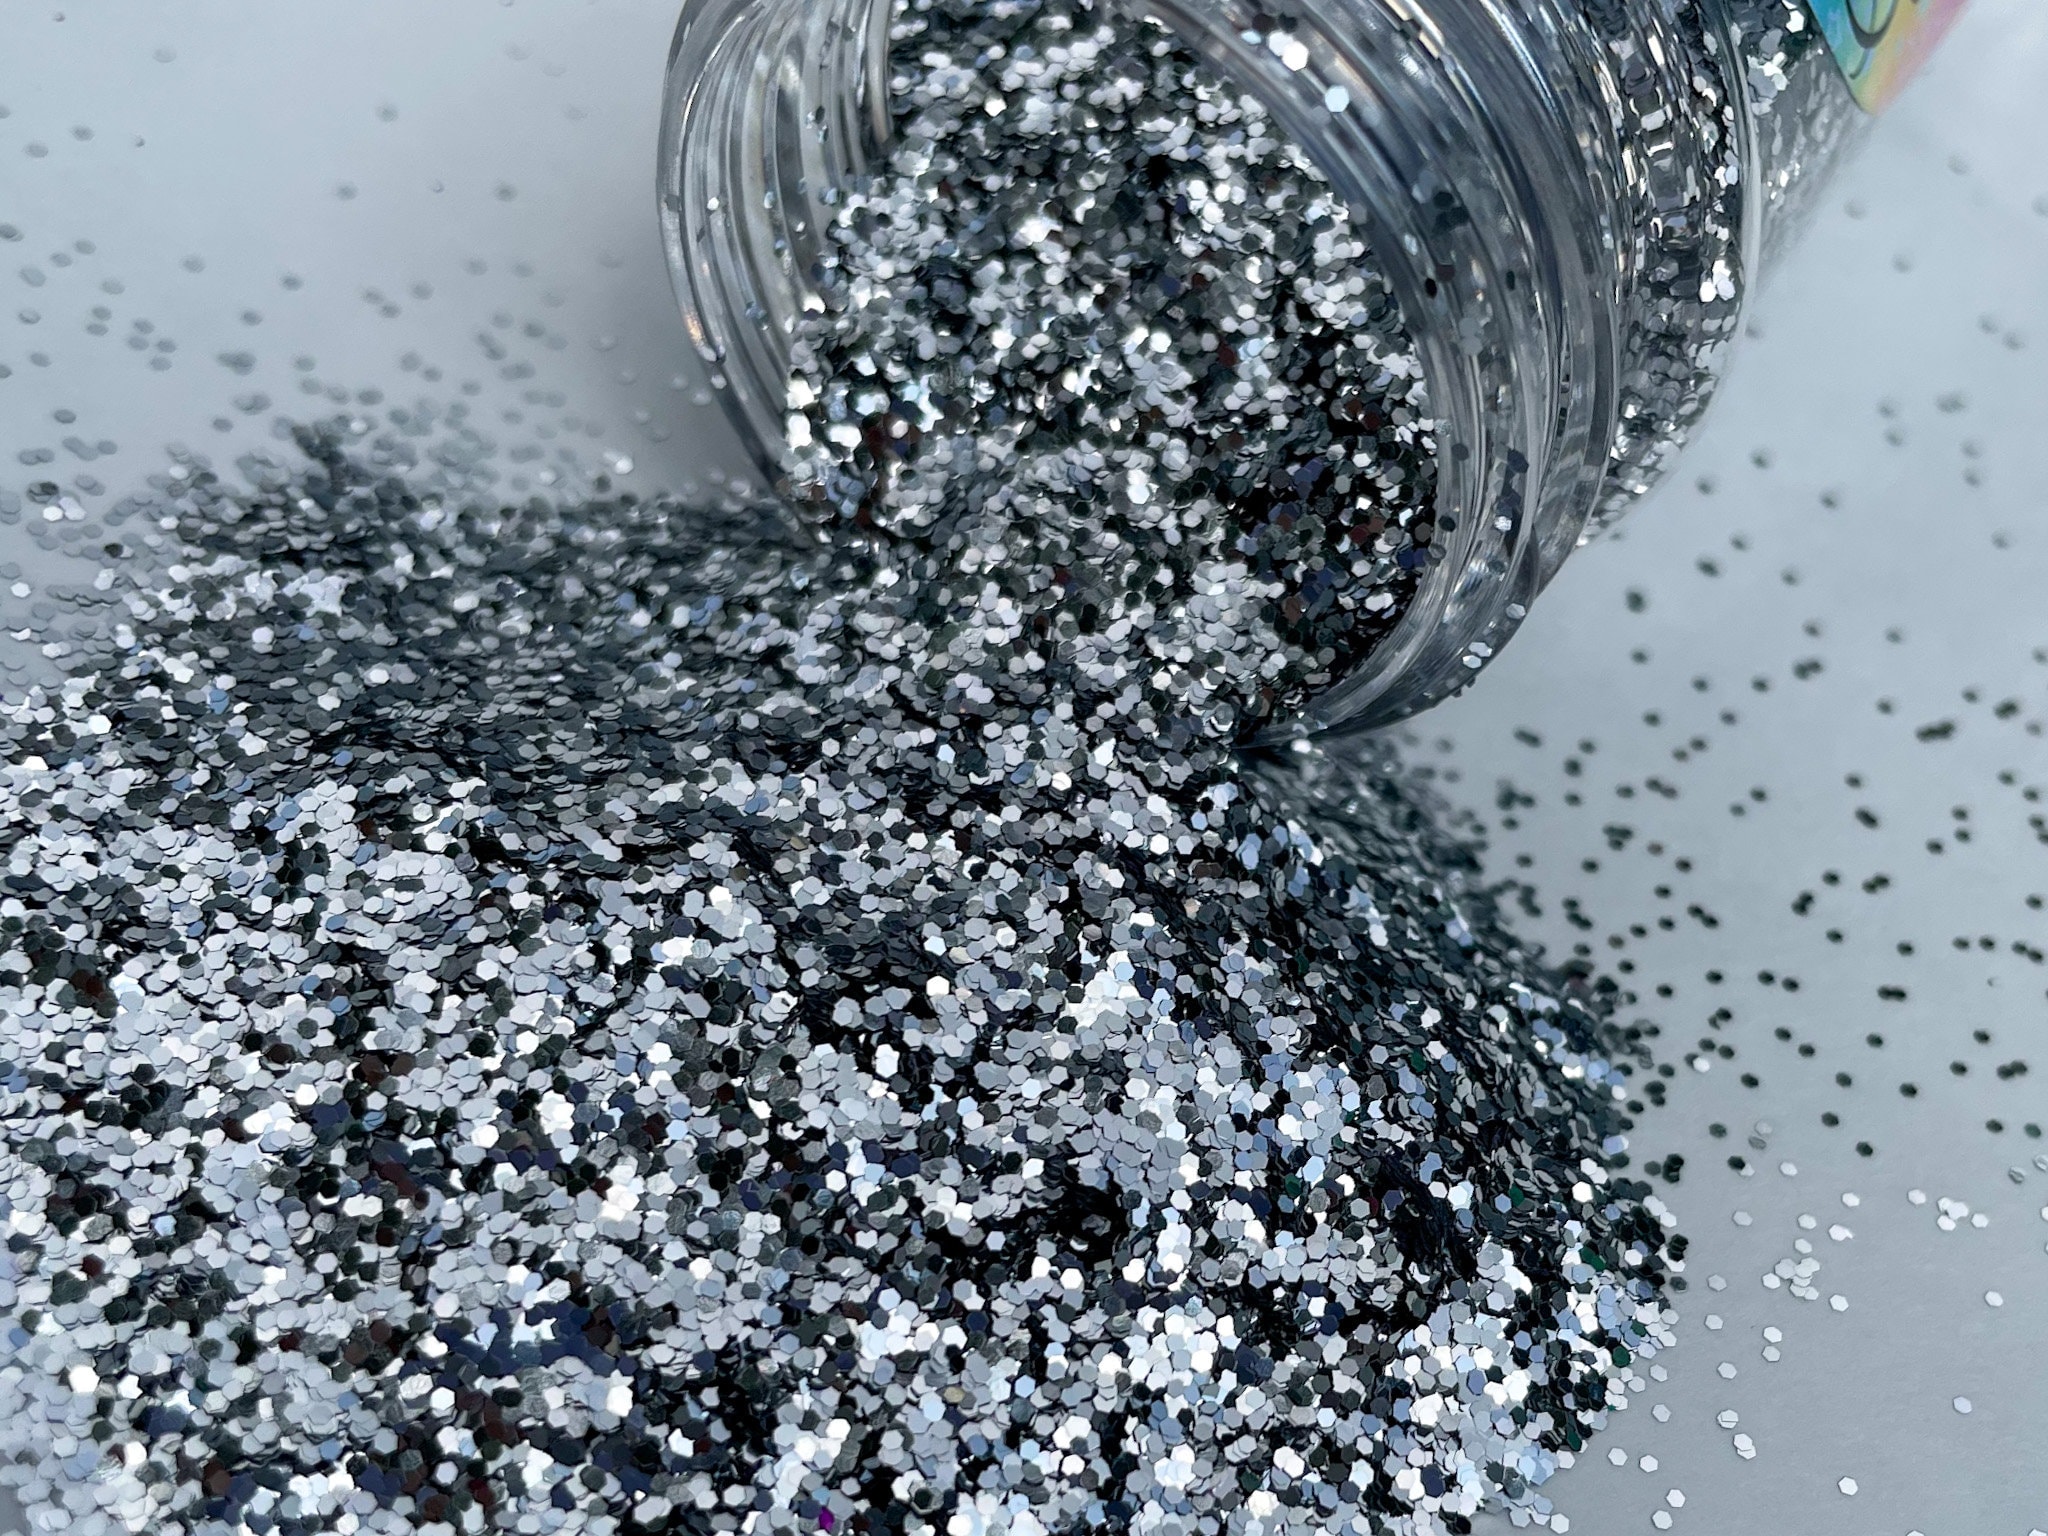 Pearl Silver Holographic Chunky Mix Glitter Shaker